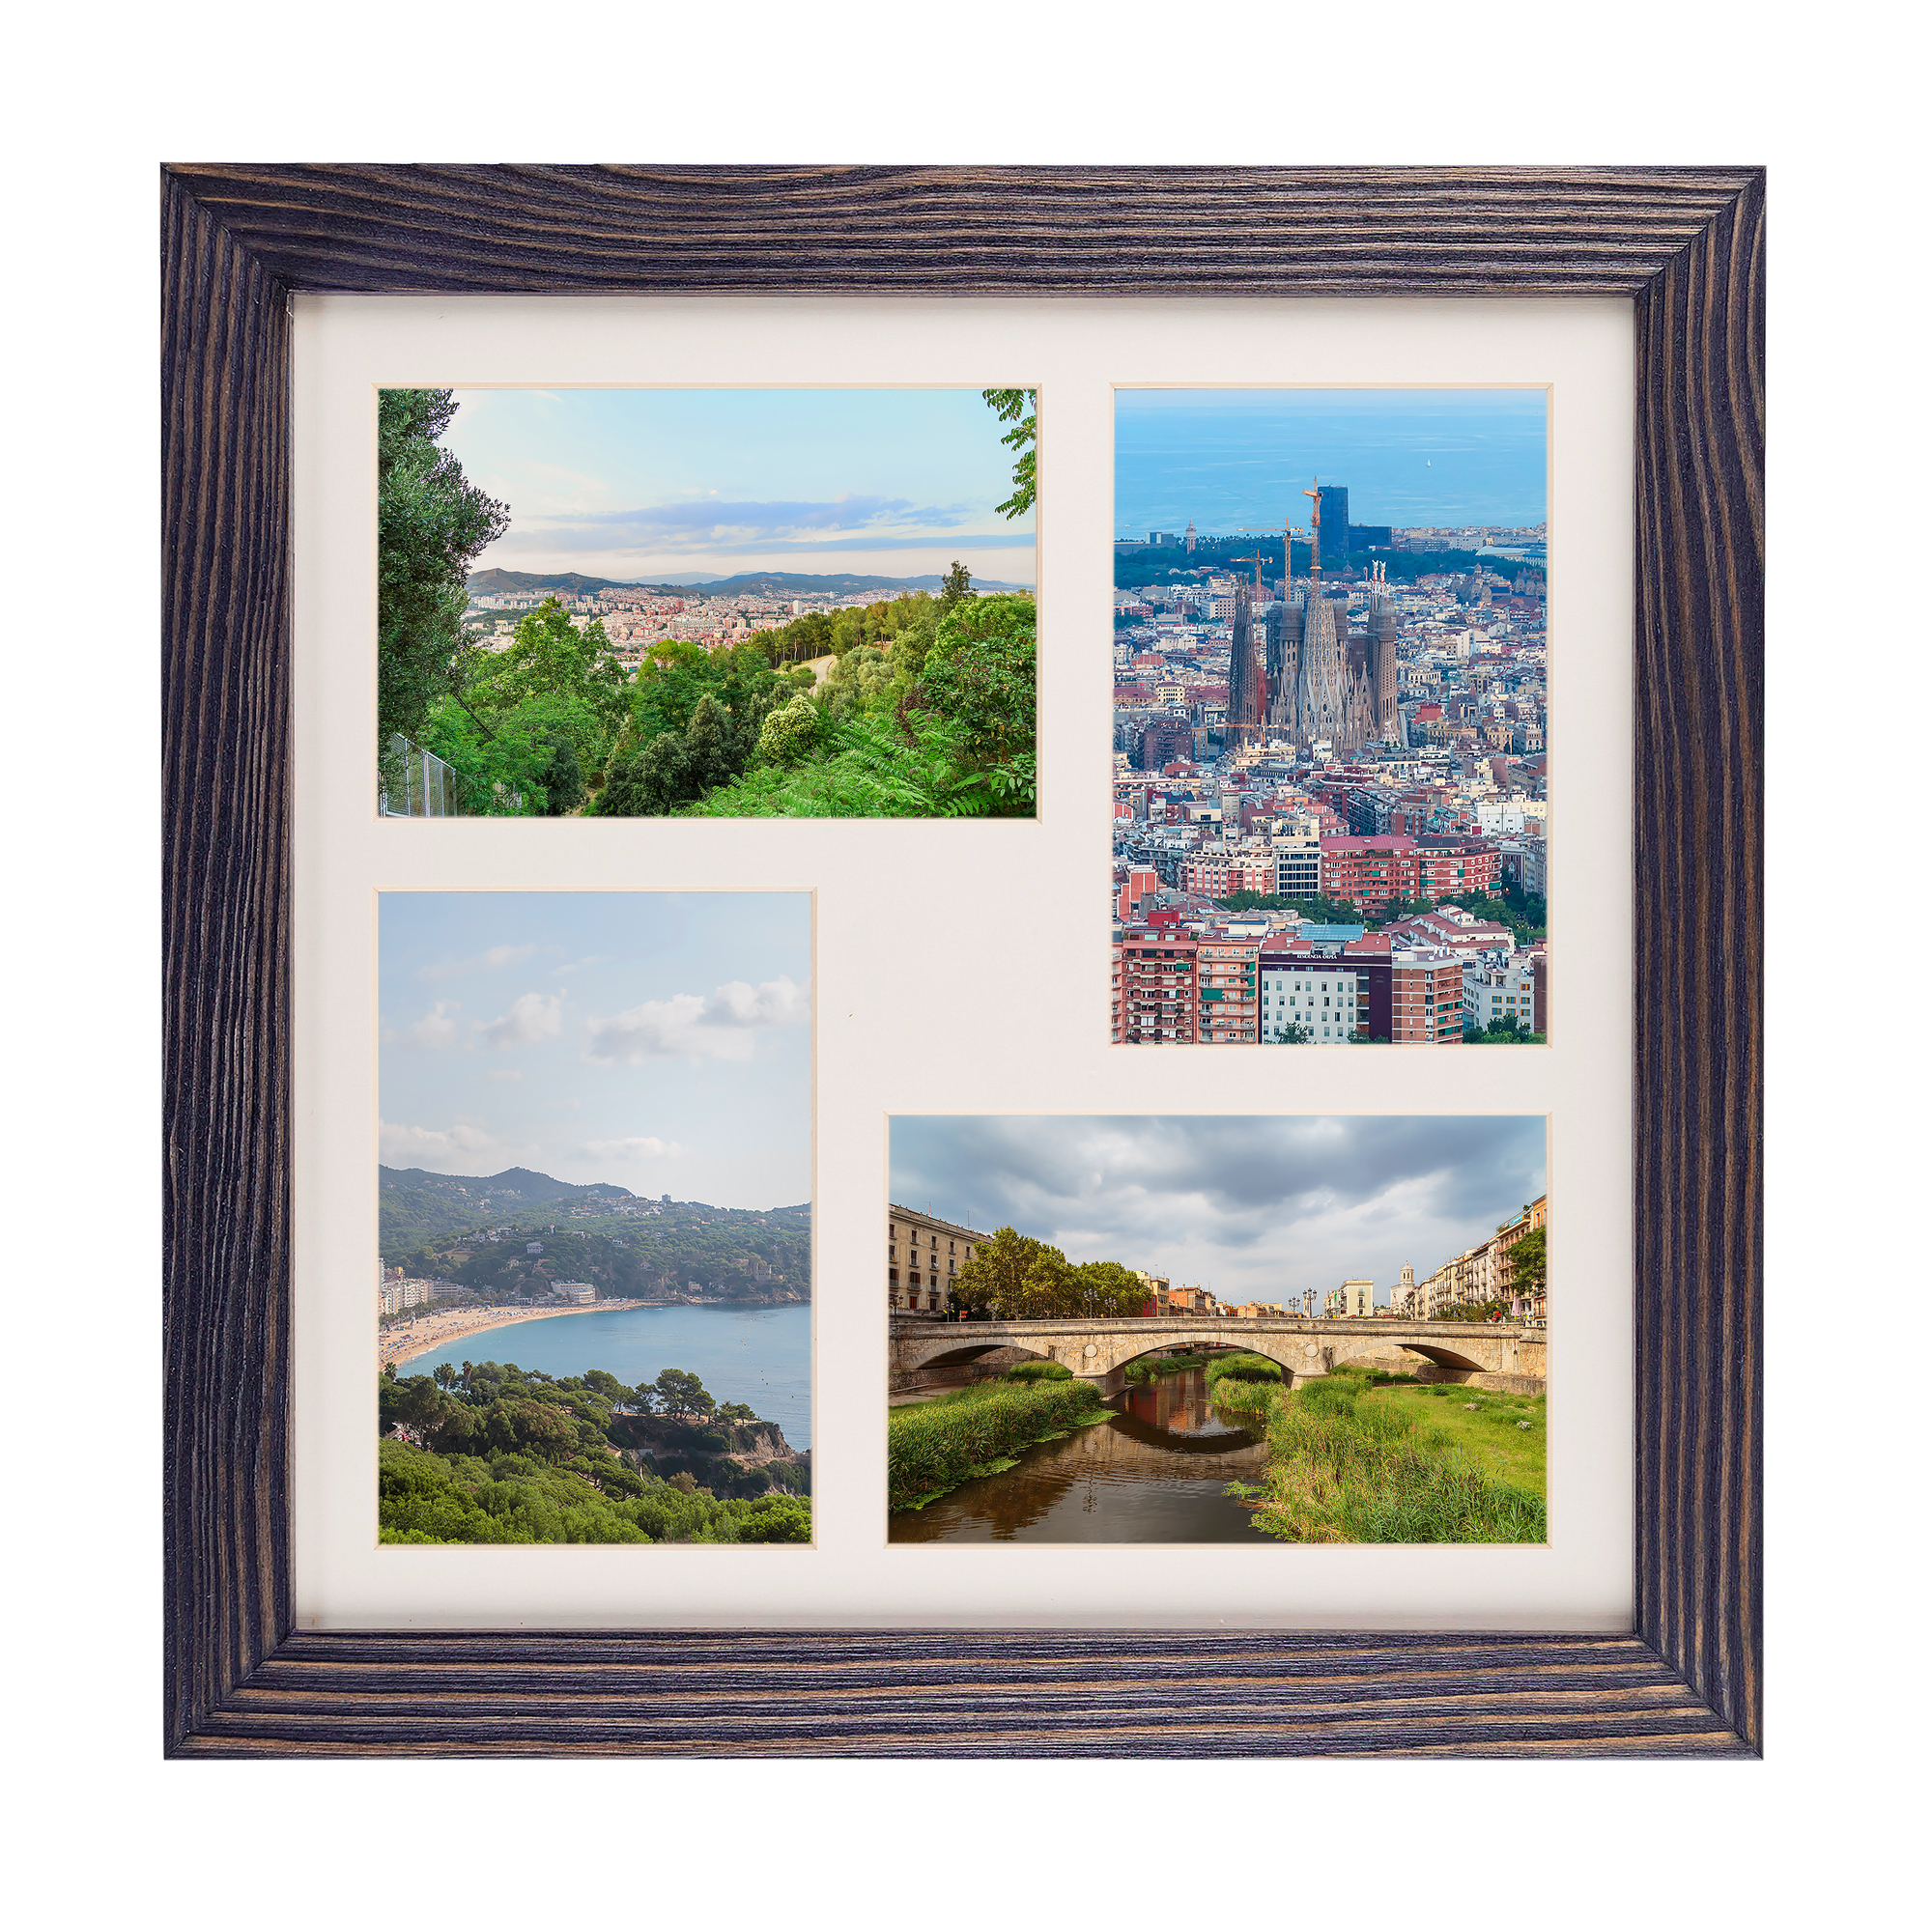 ALL > collage natural four 4x6 slots Buy from e-shop